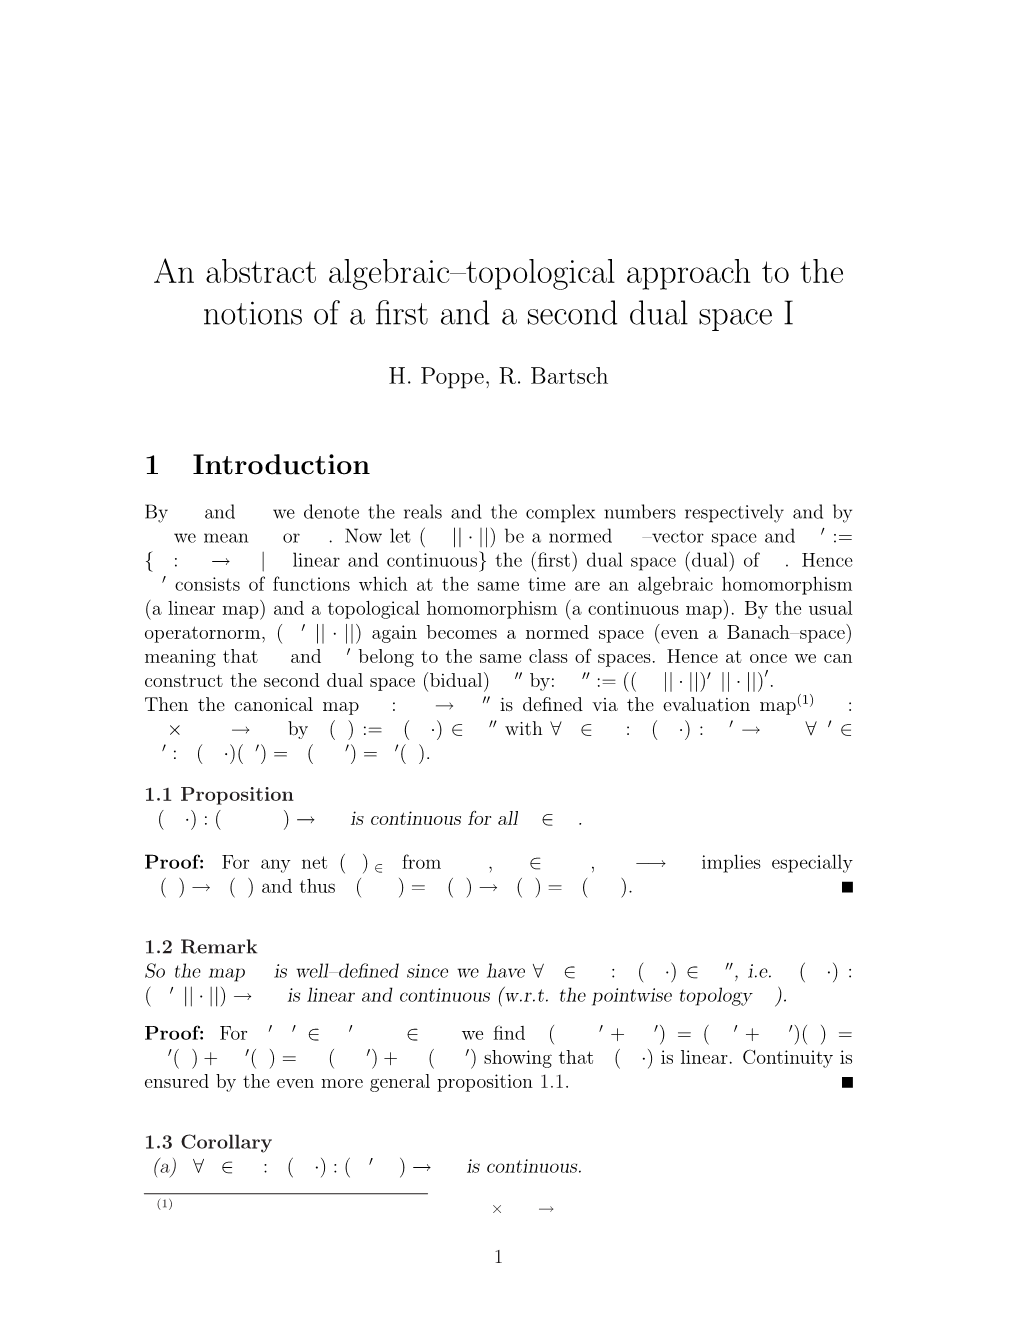 An Abstract Algebraic–Topological Approach to the Notions of a First